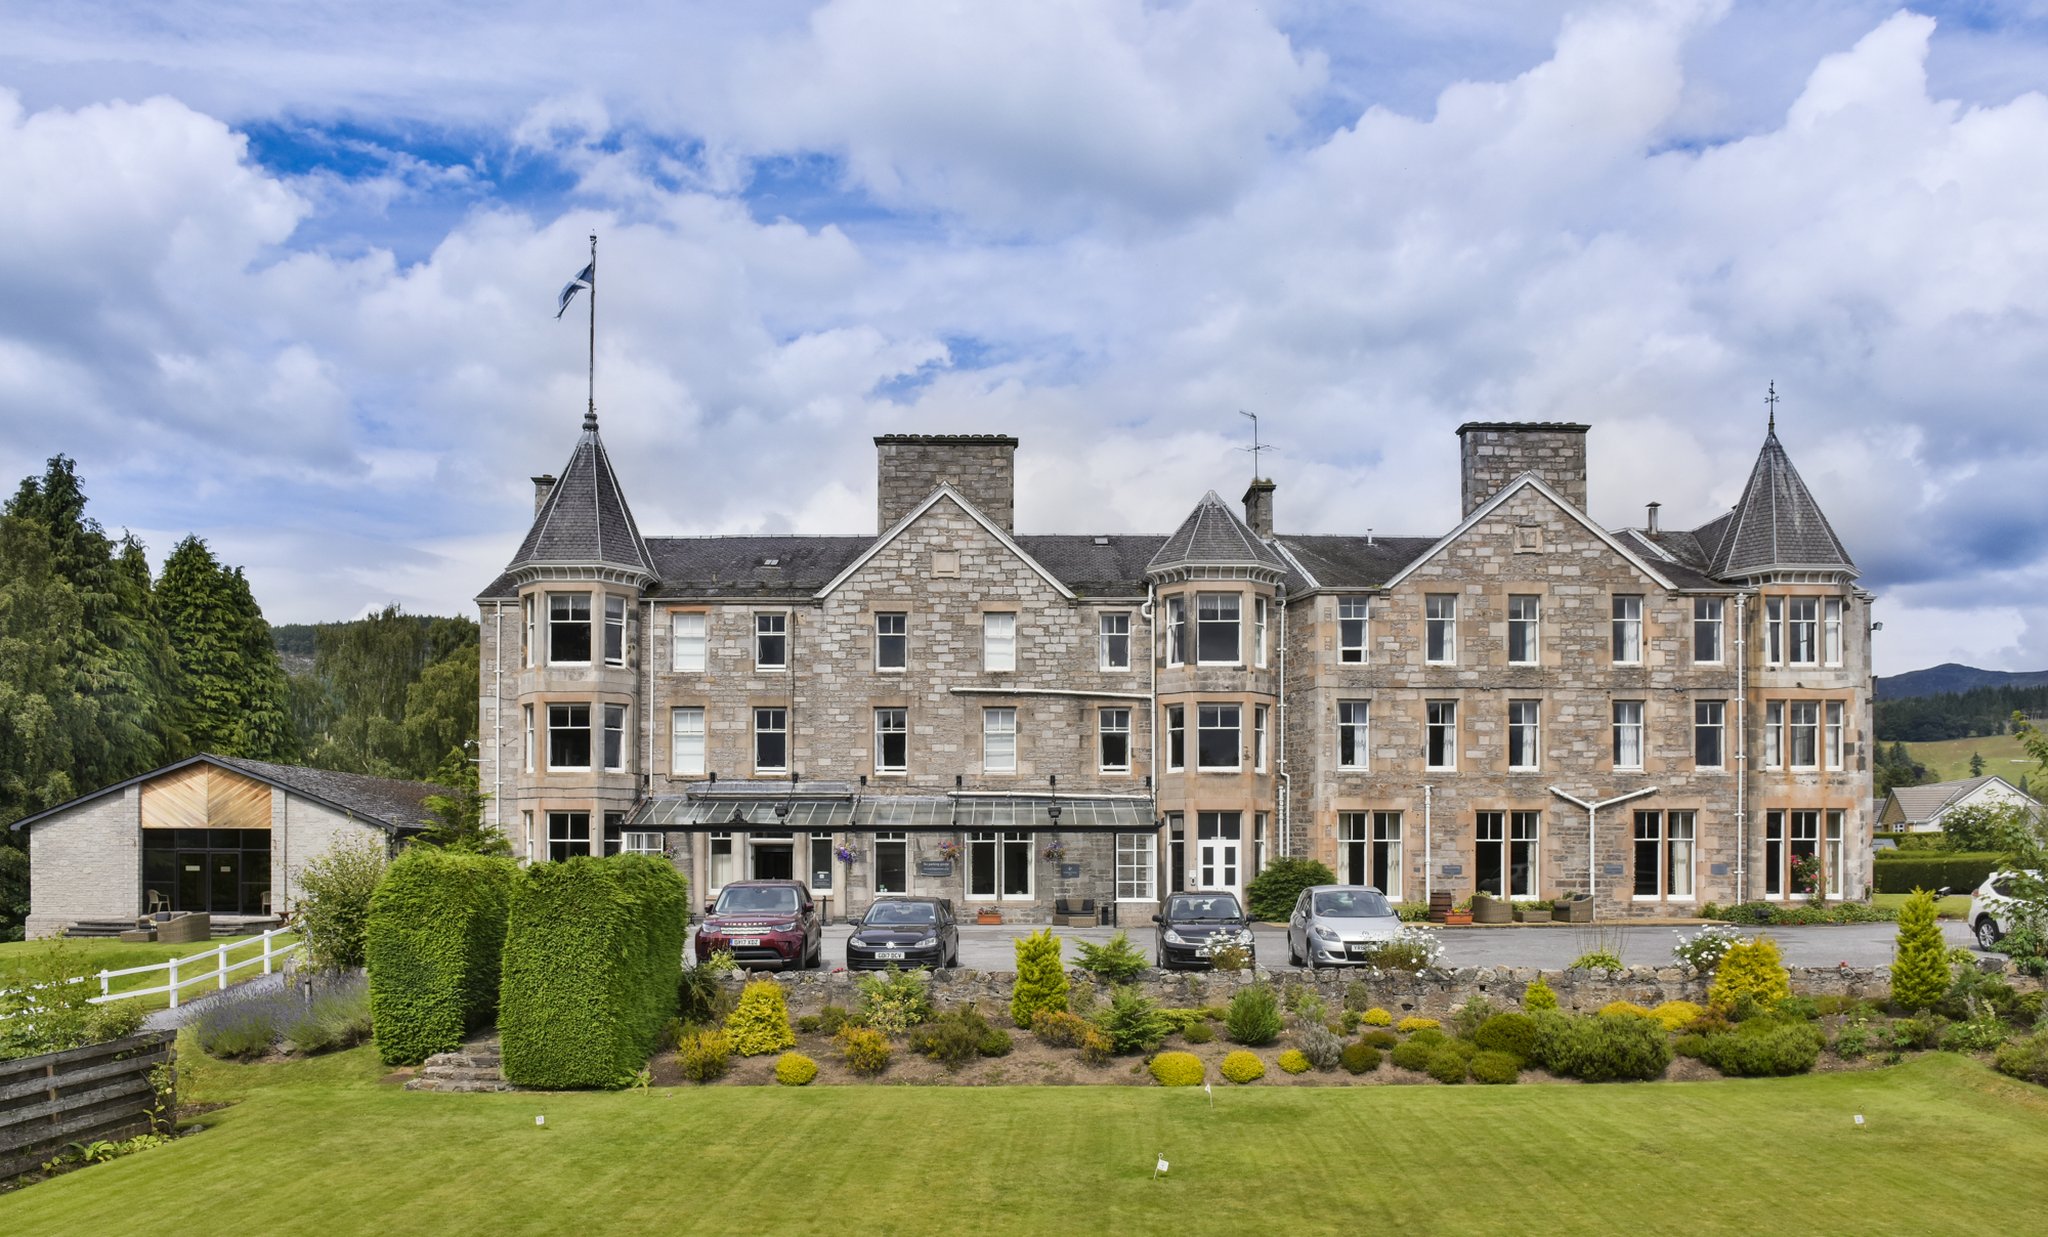 The Pitlochry Hydro Hotel image